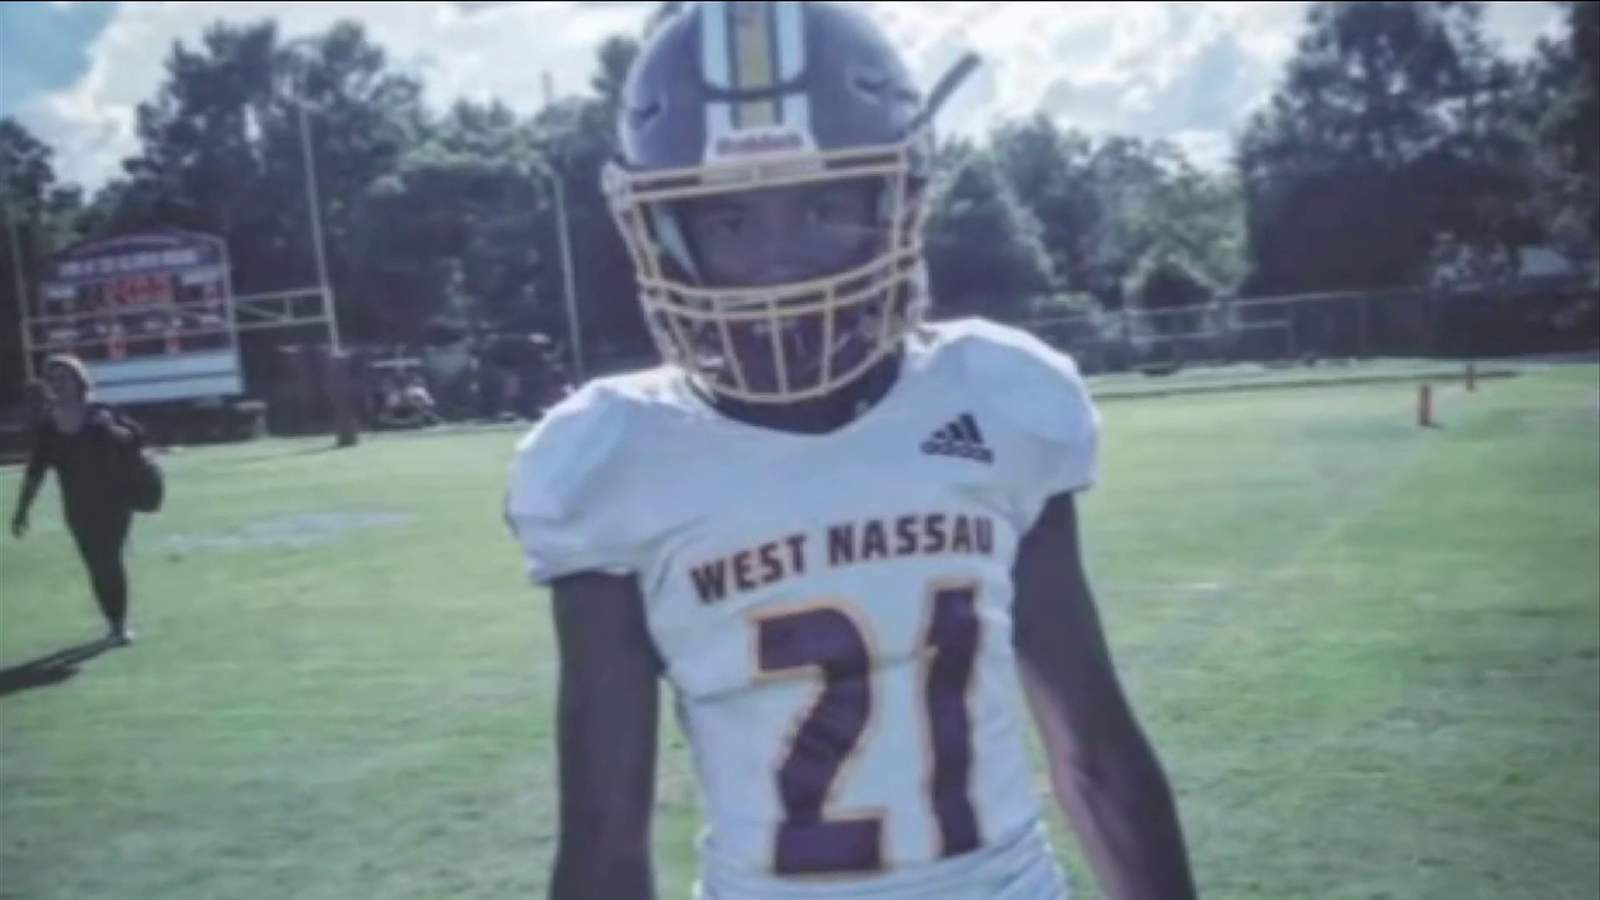 Family believes race played a part in shooting death of West Nassau High football player